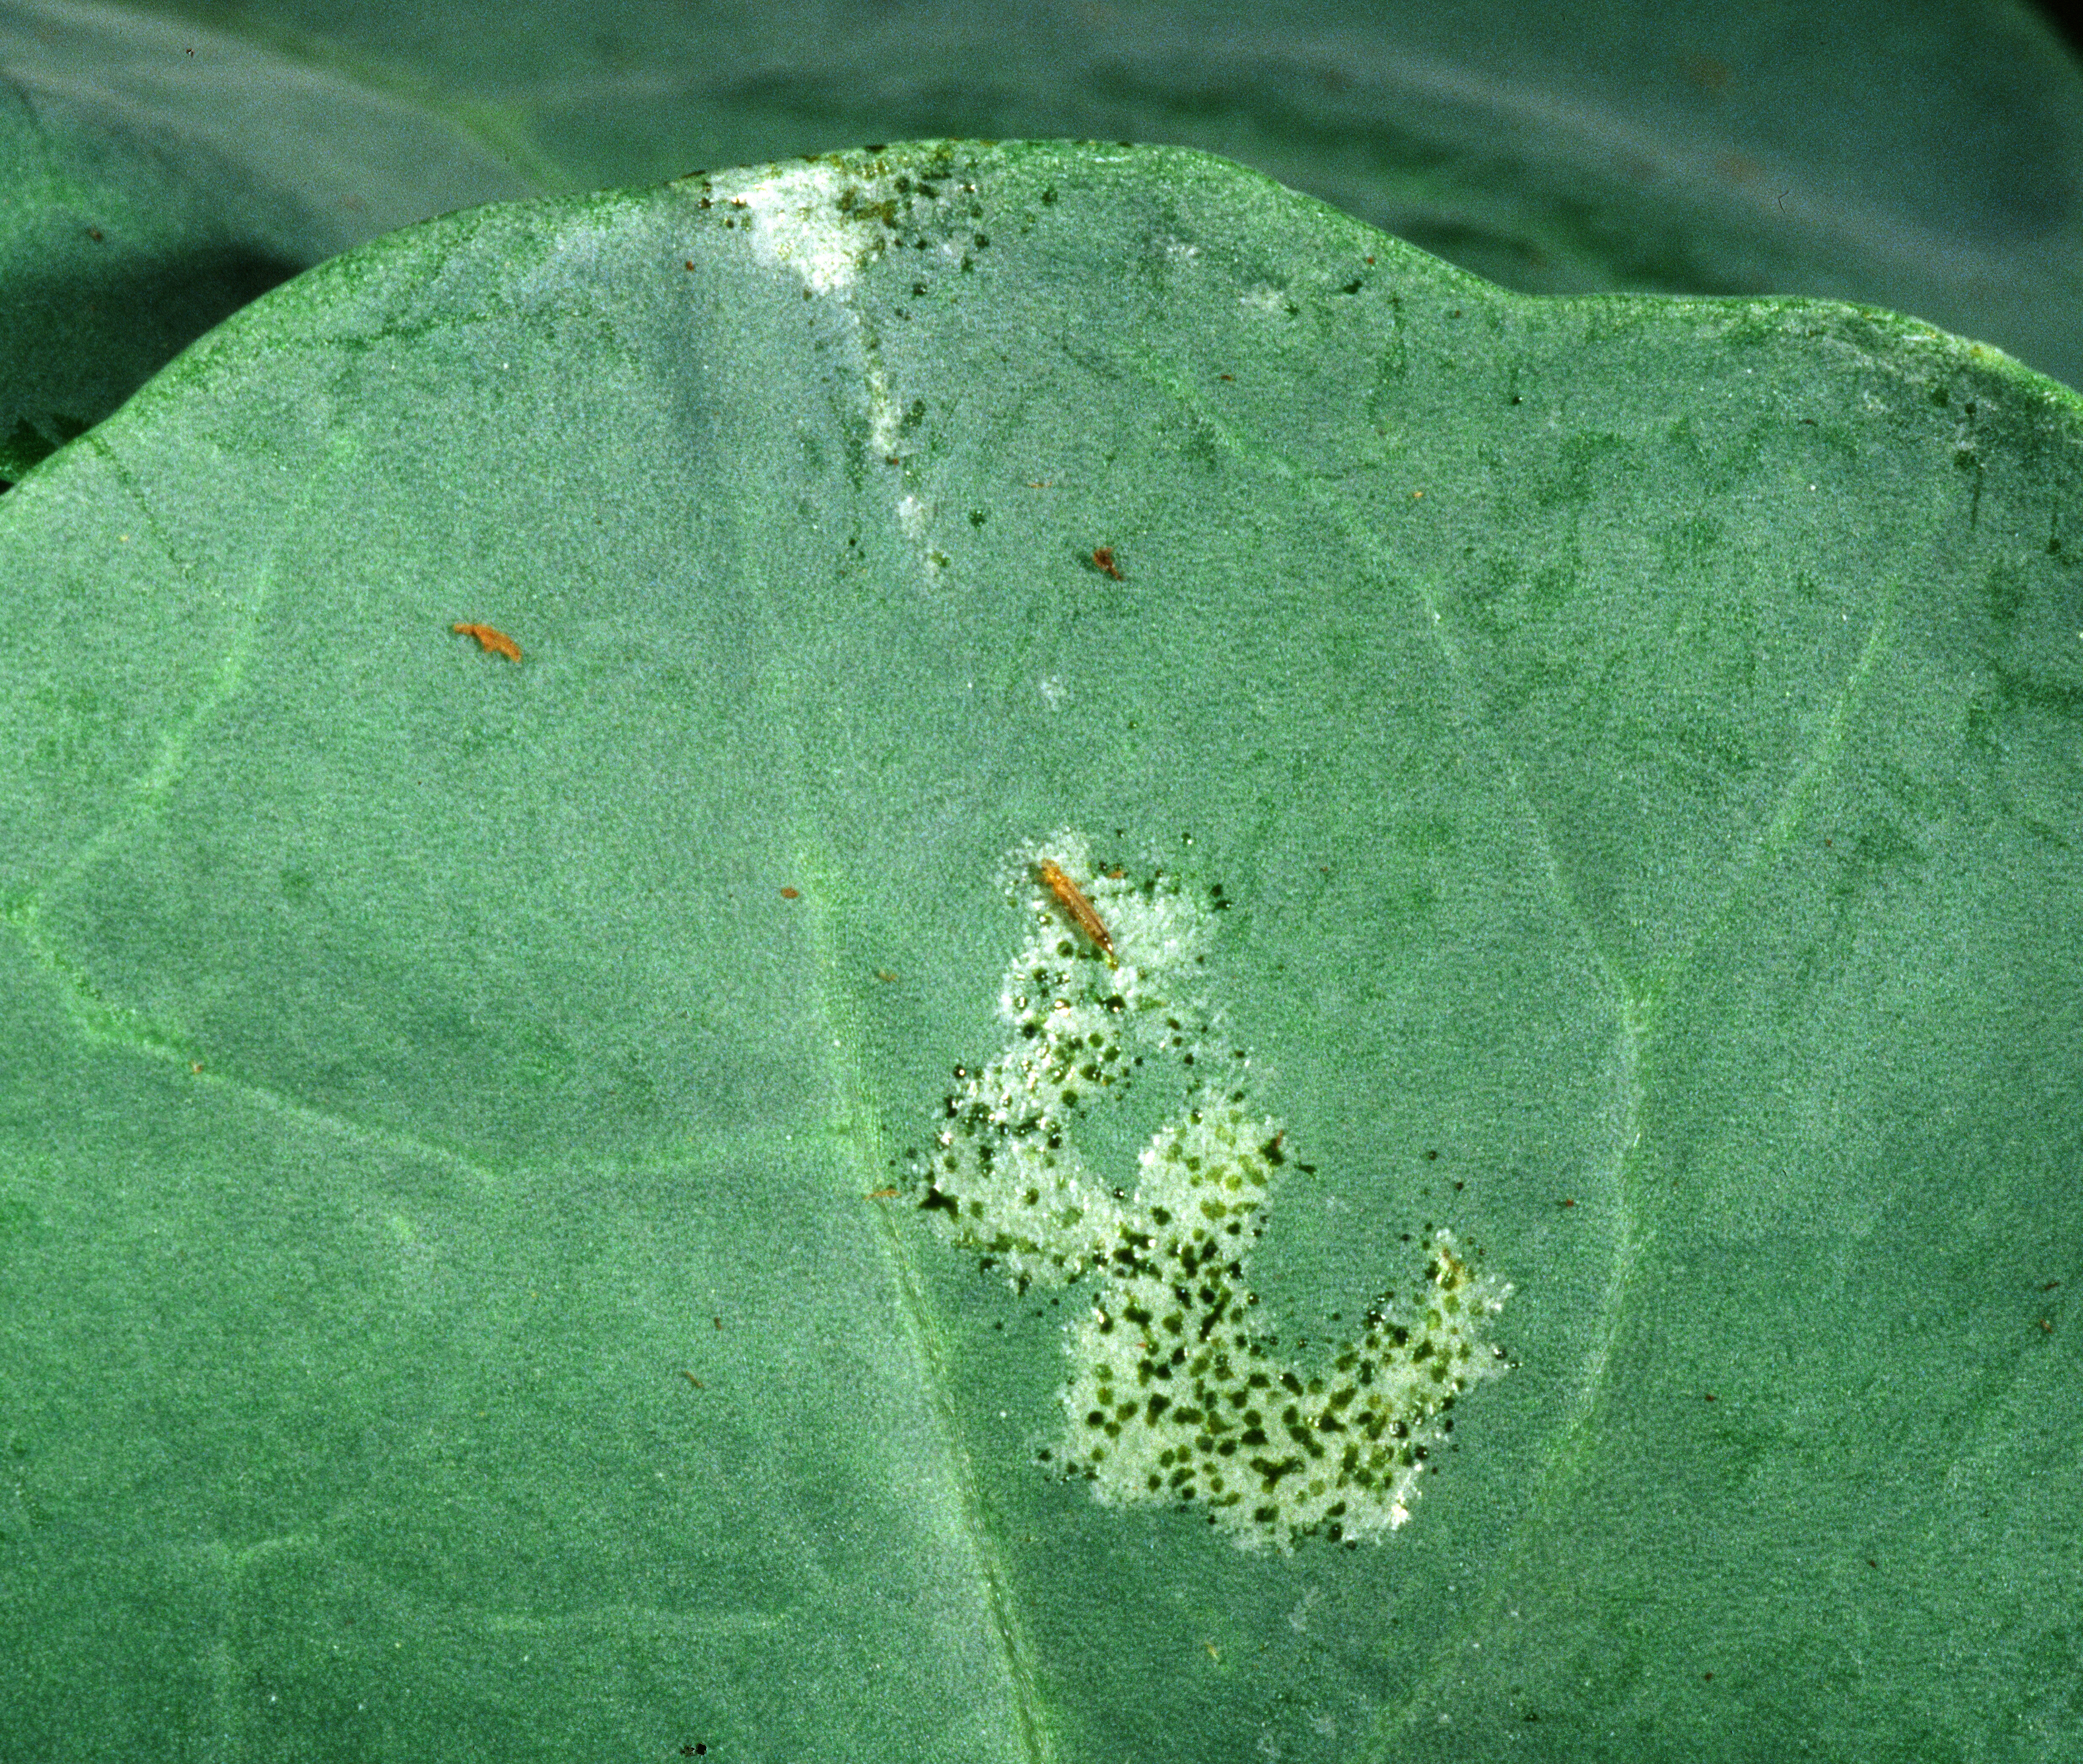 Damage to leaves, along with associated insect waste material (tar spots).